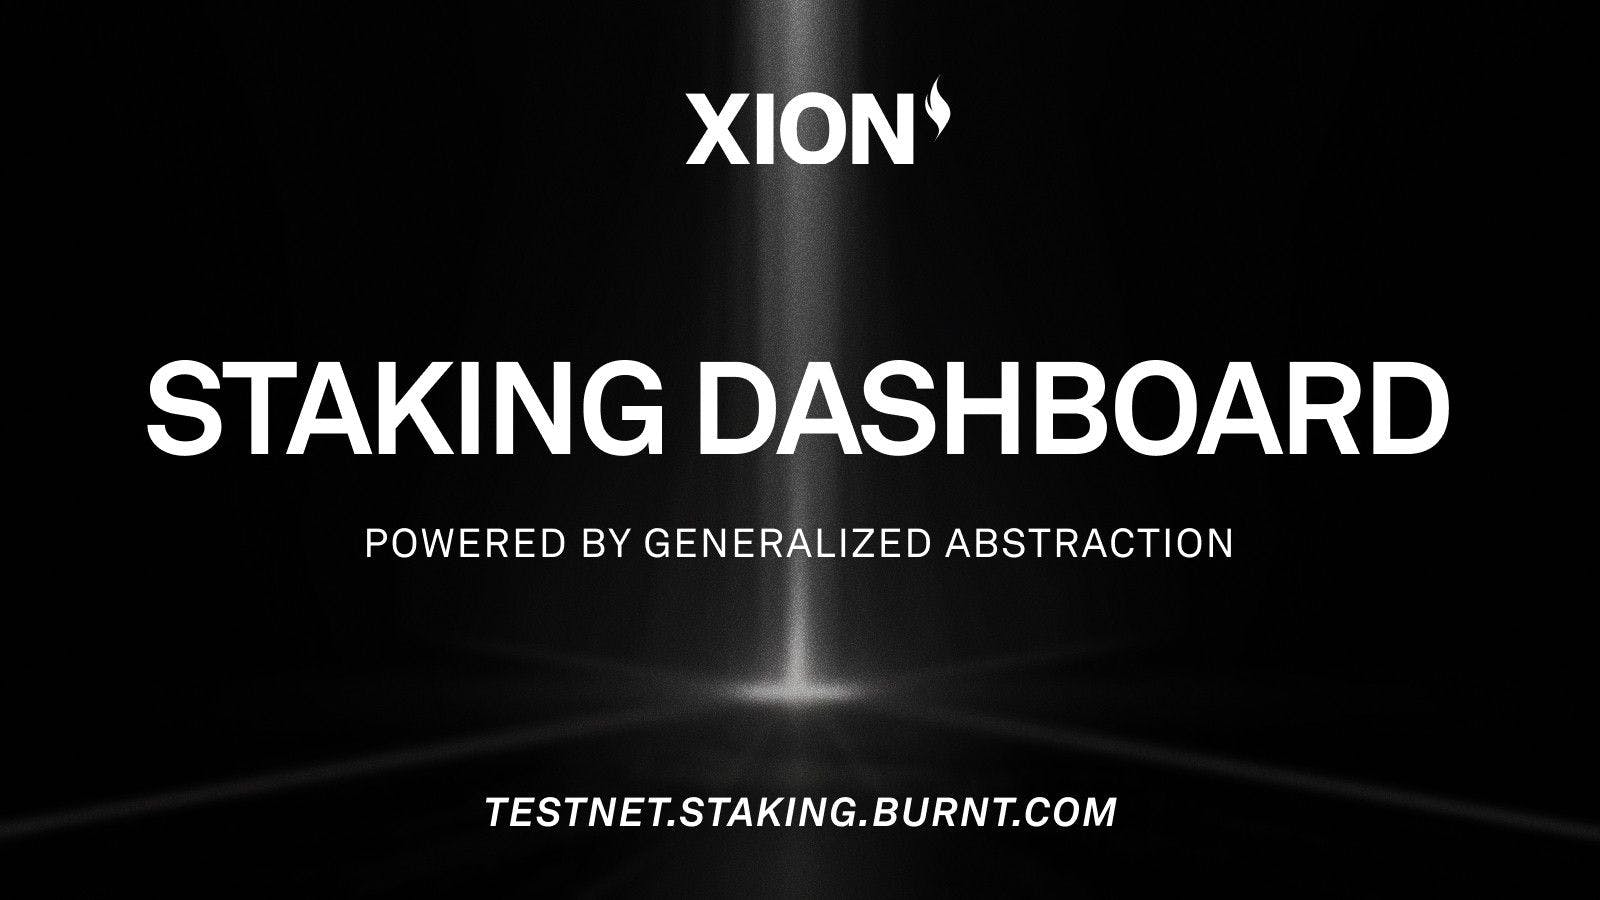 XION Secures $25M Funding Round to Accelerate the Mainstream Adoption of Web3